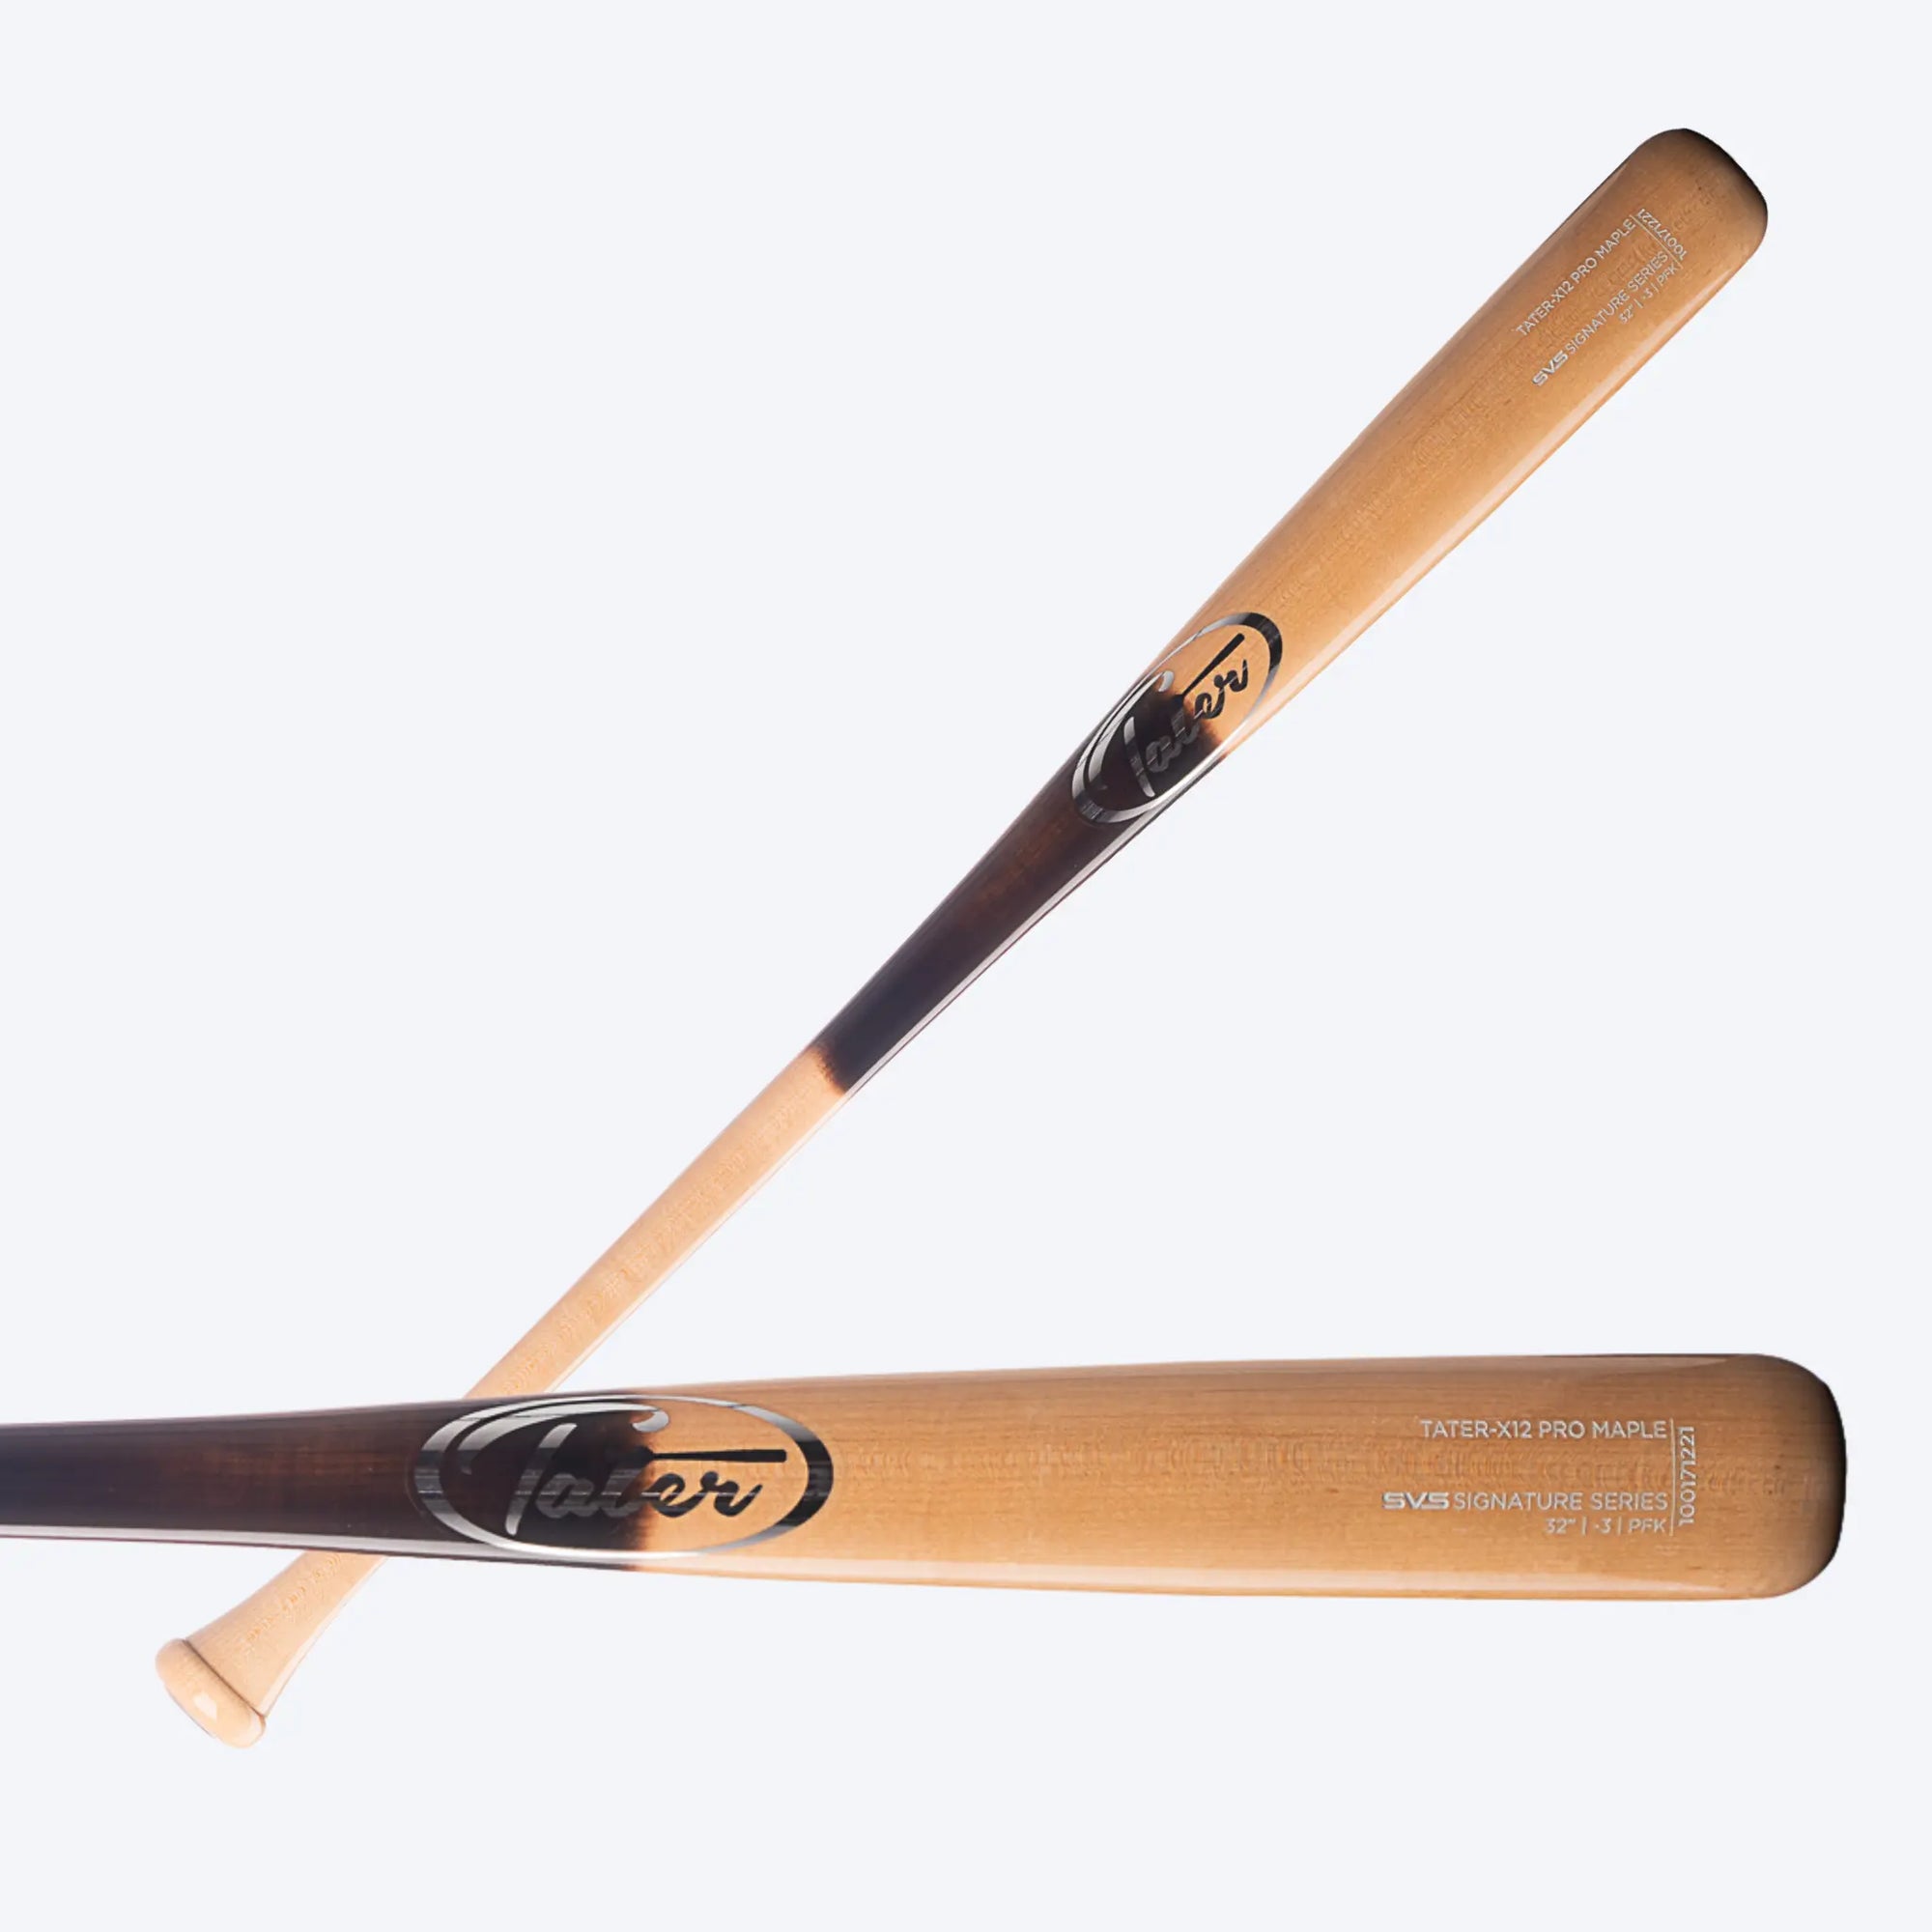 A high-quality wooden baseball bat with a dark brown pine tar grip, showcasing the Tater Baseball logo near the handle.This image features two Tater X12 Pro Maple baseball bats in a crossed position against a clear background. The top bat is displayed with the handle towards us, showing off the smooth pine tar finish, while the bottom bat presents the barrel with the brand's logo clearly visible, suggesting a bat well-suited for high school players due to its balance and craftsmanship.